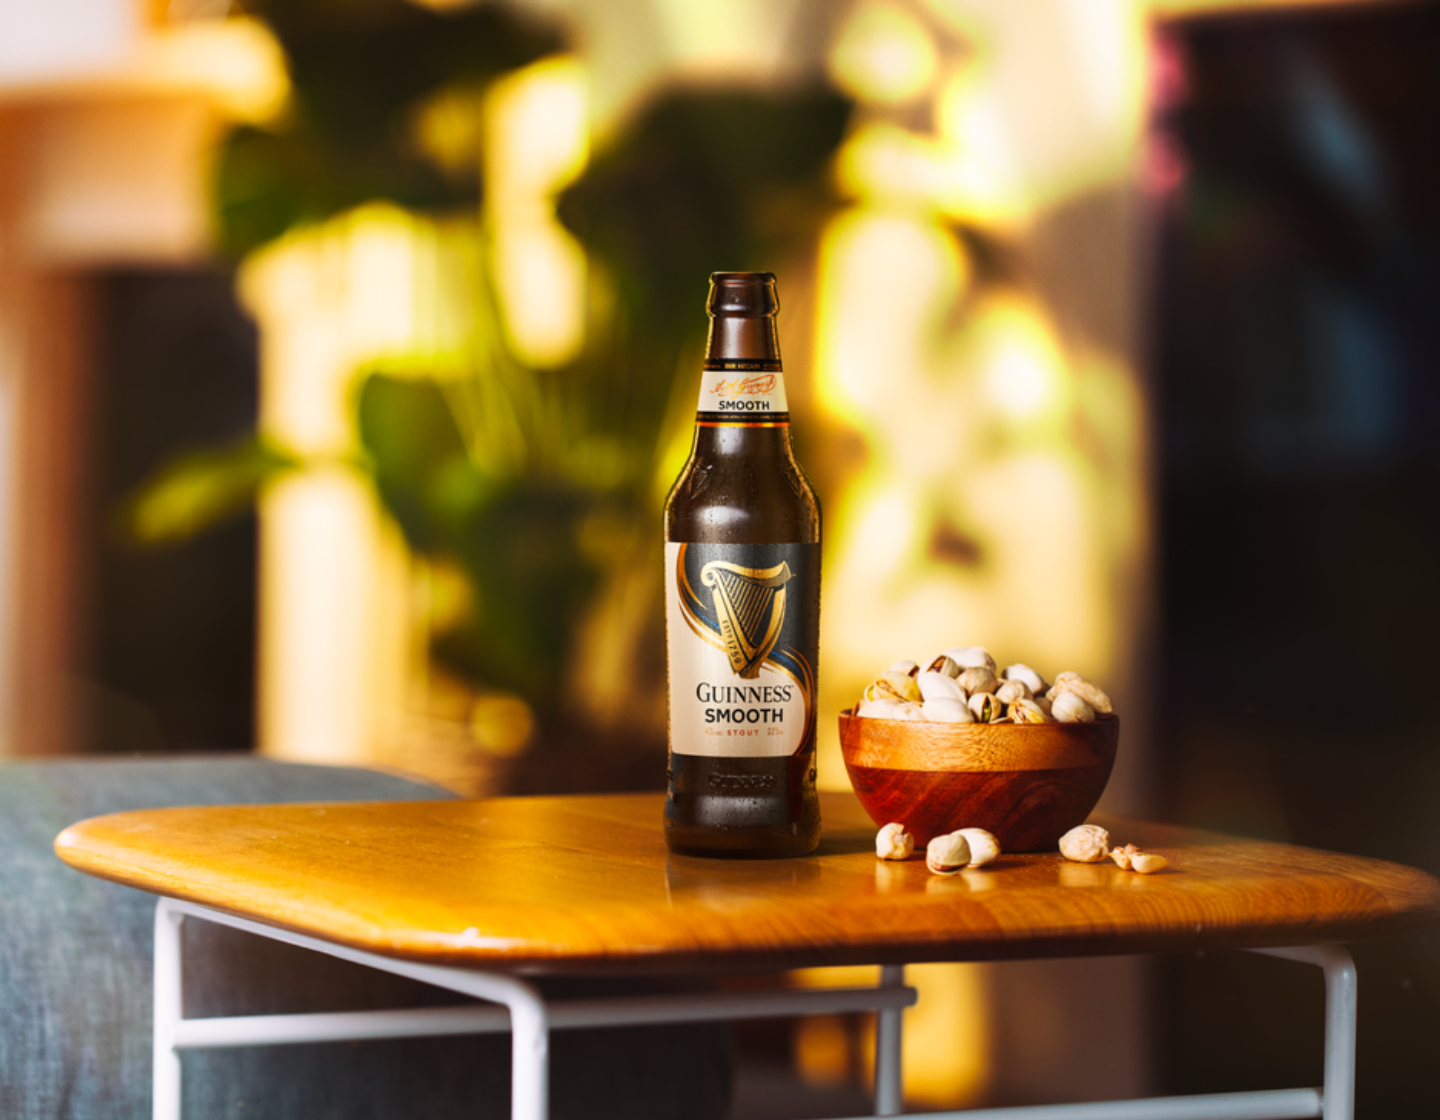 Bottle of Guinness Smooth on table beside bowl of popcorn